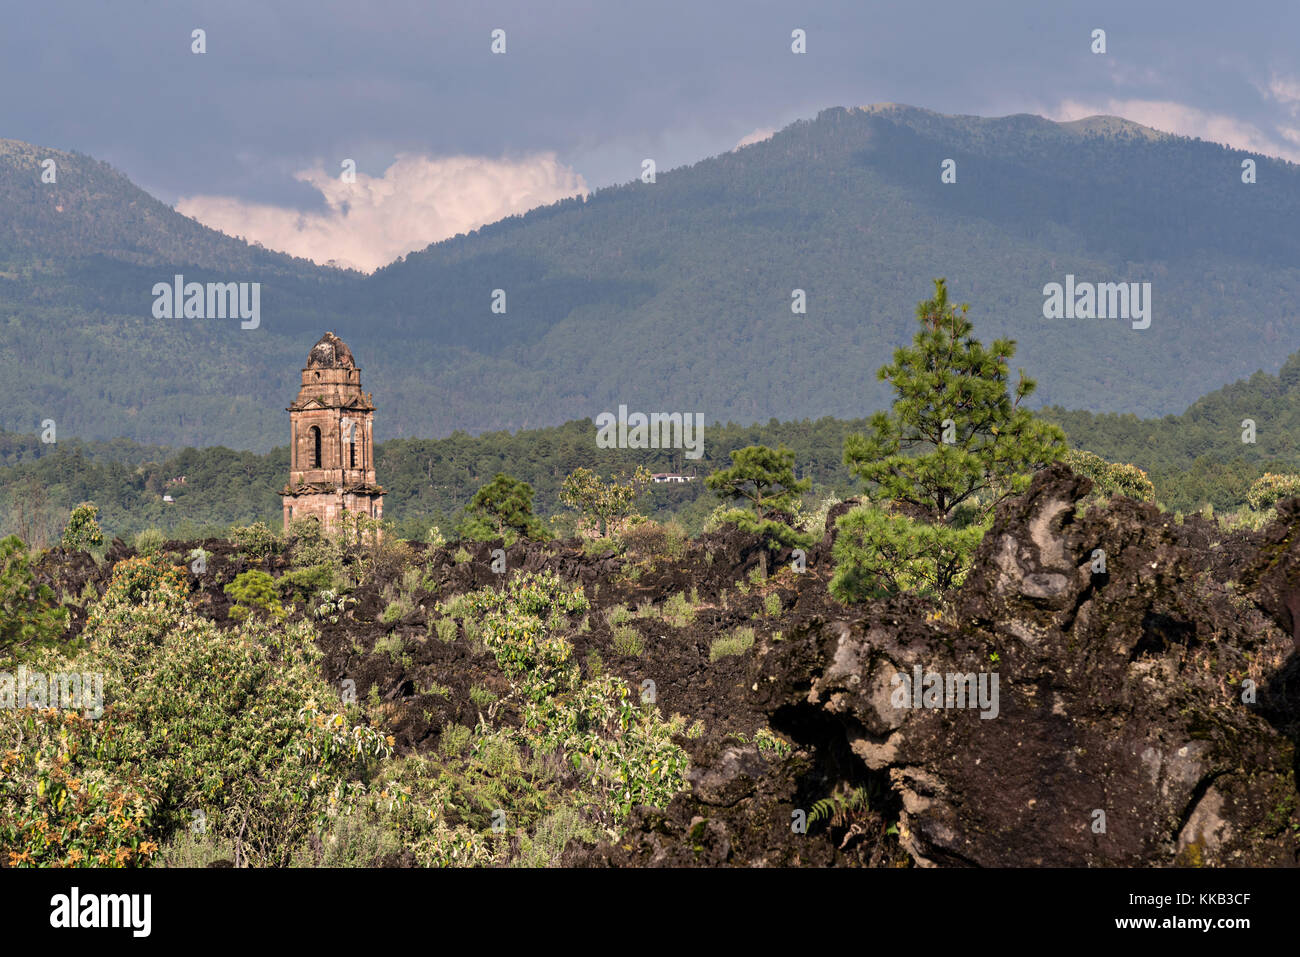 The steeple of San Juan Parangaricutiro church pokes up out of a sea of dried lava rock in the remote village of San Juan Parangaricutiro, Michoacan, Mexico. This church is the only remaining structure left buried in the eight-year eruption of the Paricutin volcano which consumed two villages in 1943 and covered the region in lava and ash. Stock Photo